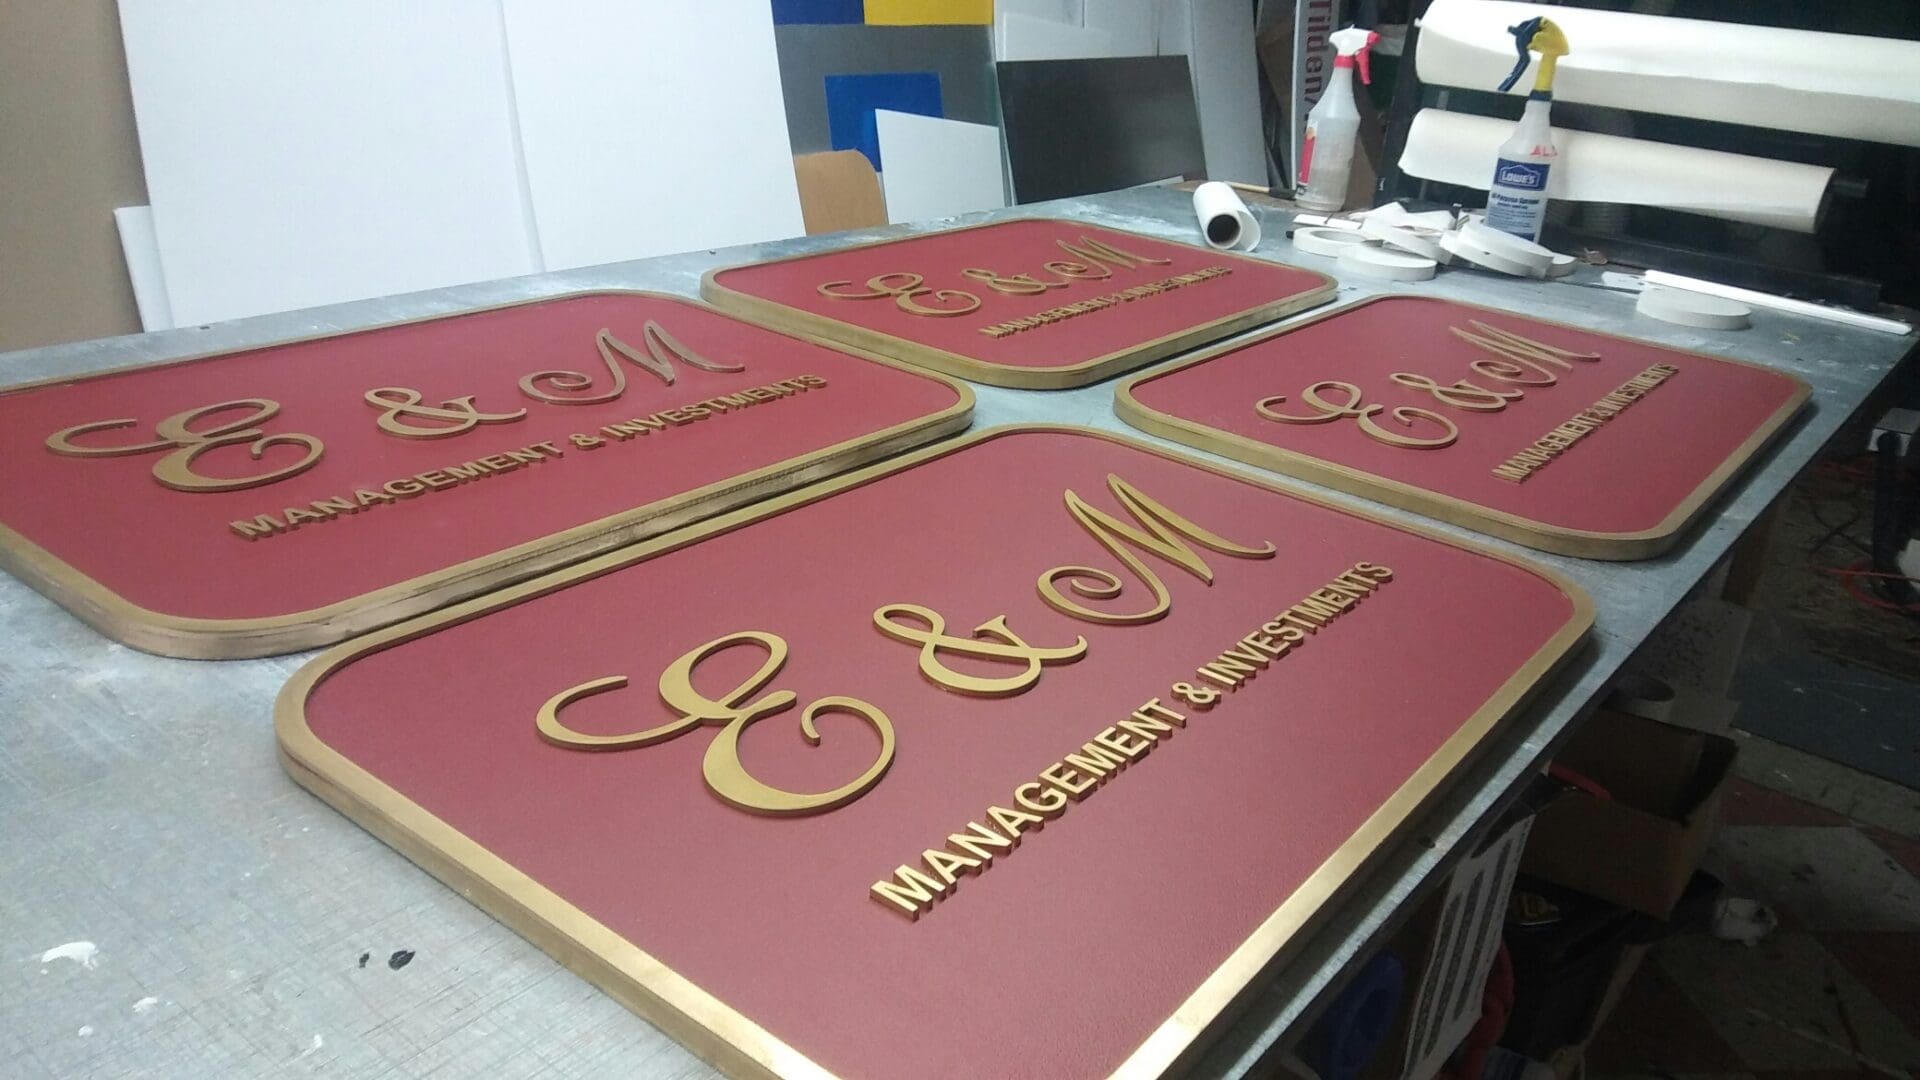 Four custom-made signs on a workshop table, each featuring the logo 